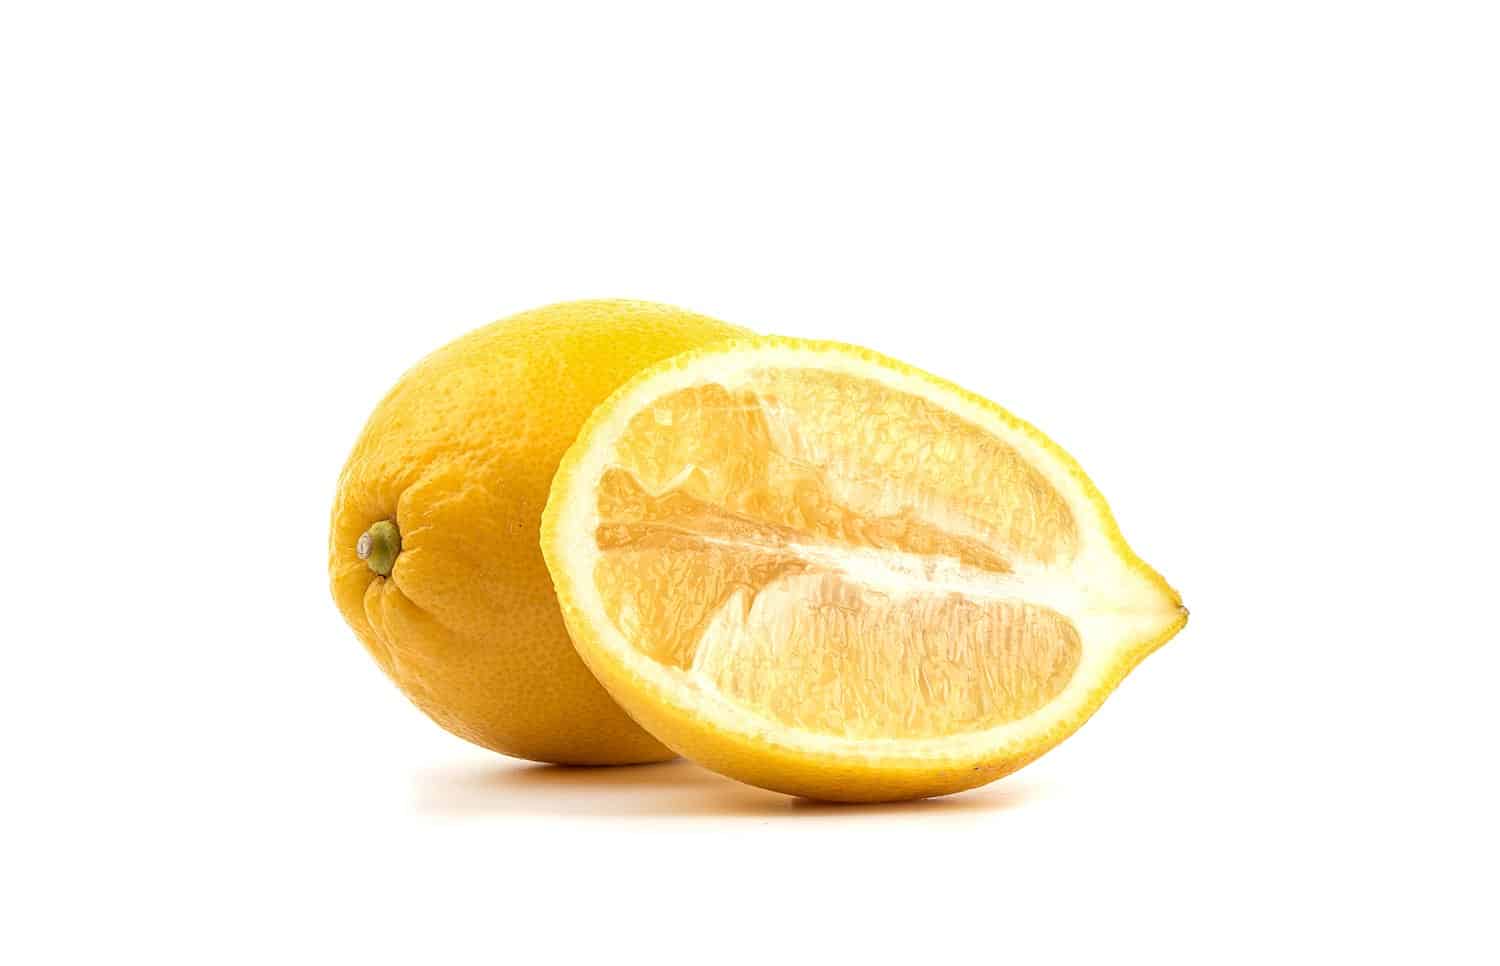 A whole lemon and half of the fruit cut lengthwise on a white background.